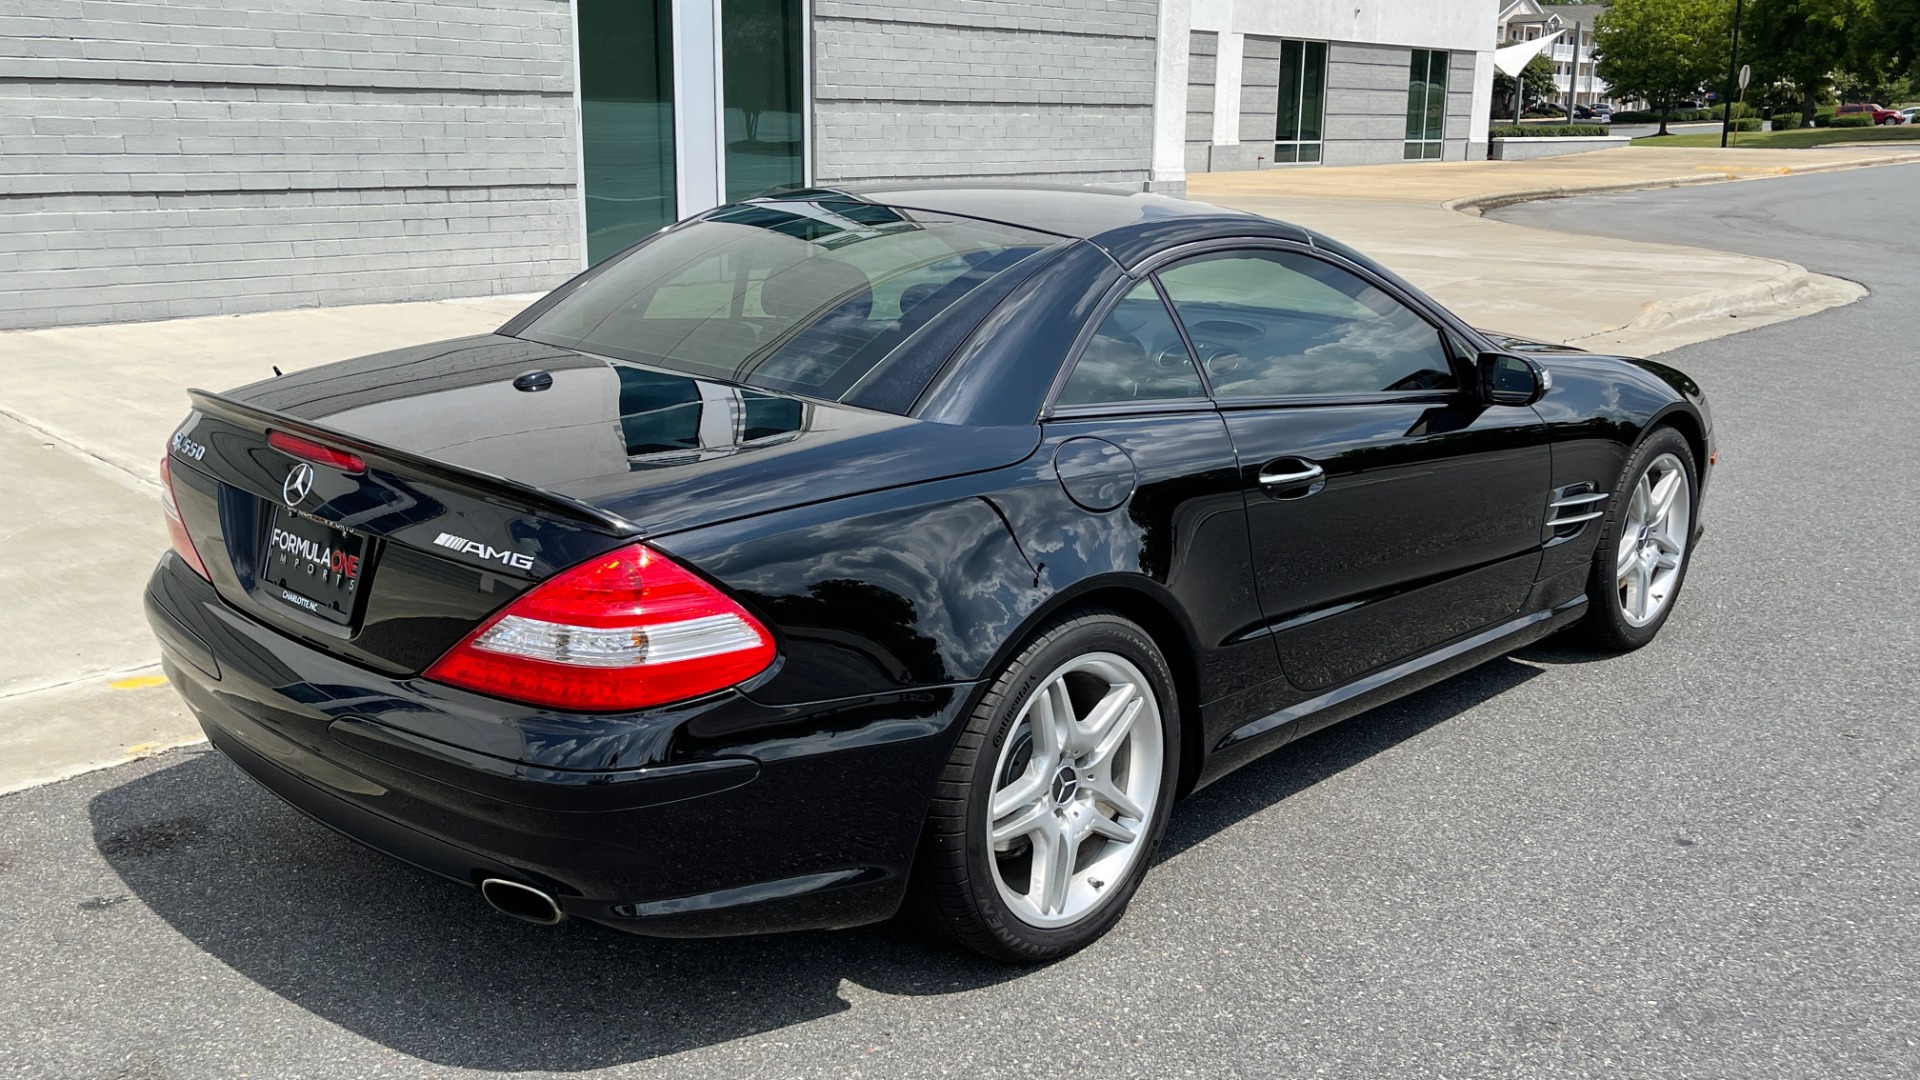 Used 2007 Mercedes-Benz SL-Class 5.5L V8 for sale $18,995 at Formula Imports in Charlotte NC 28227 4